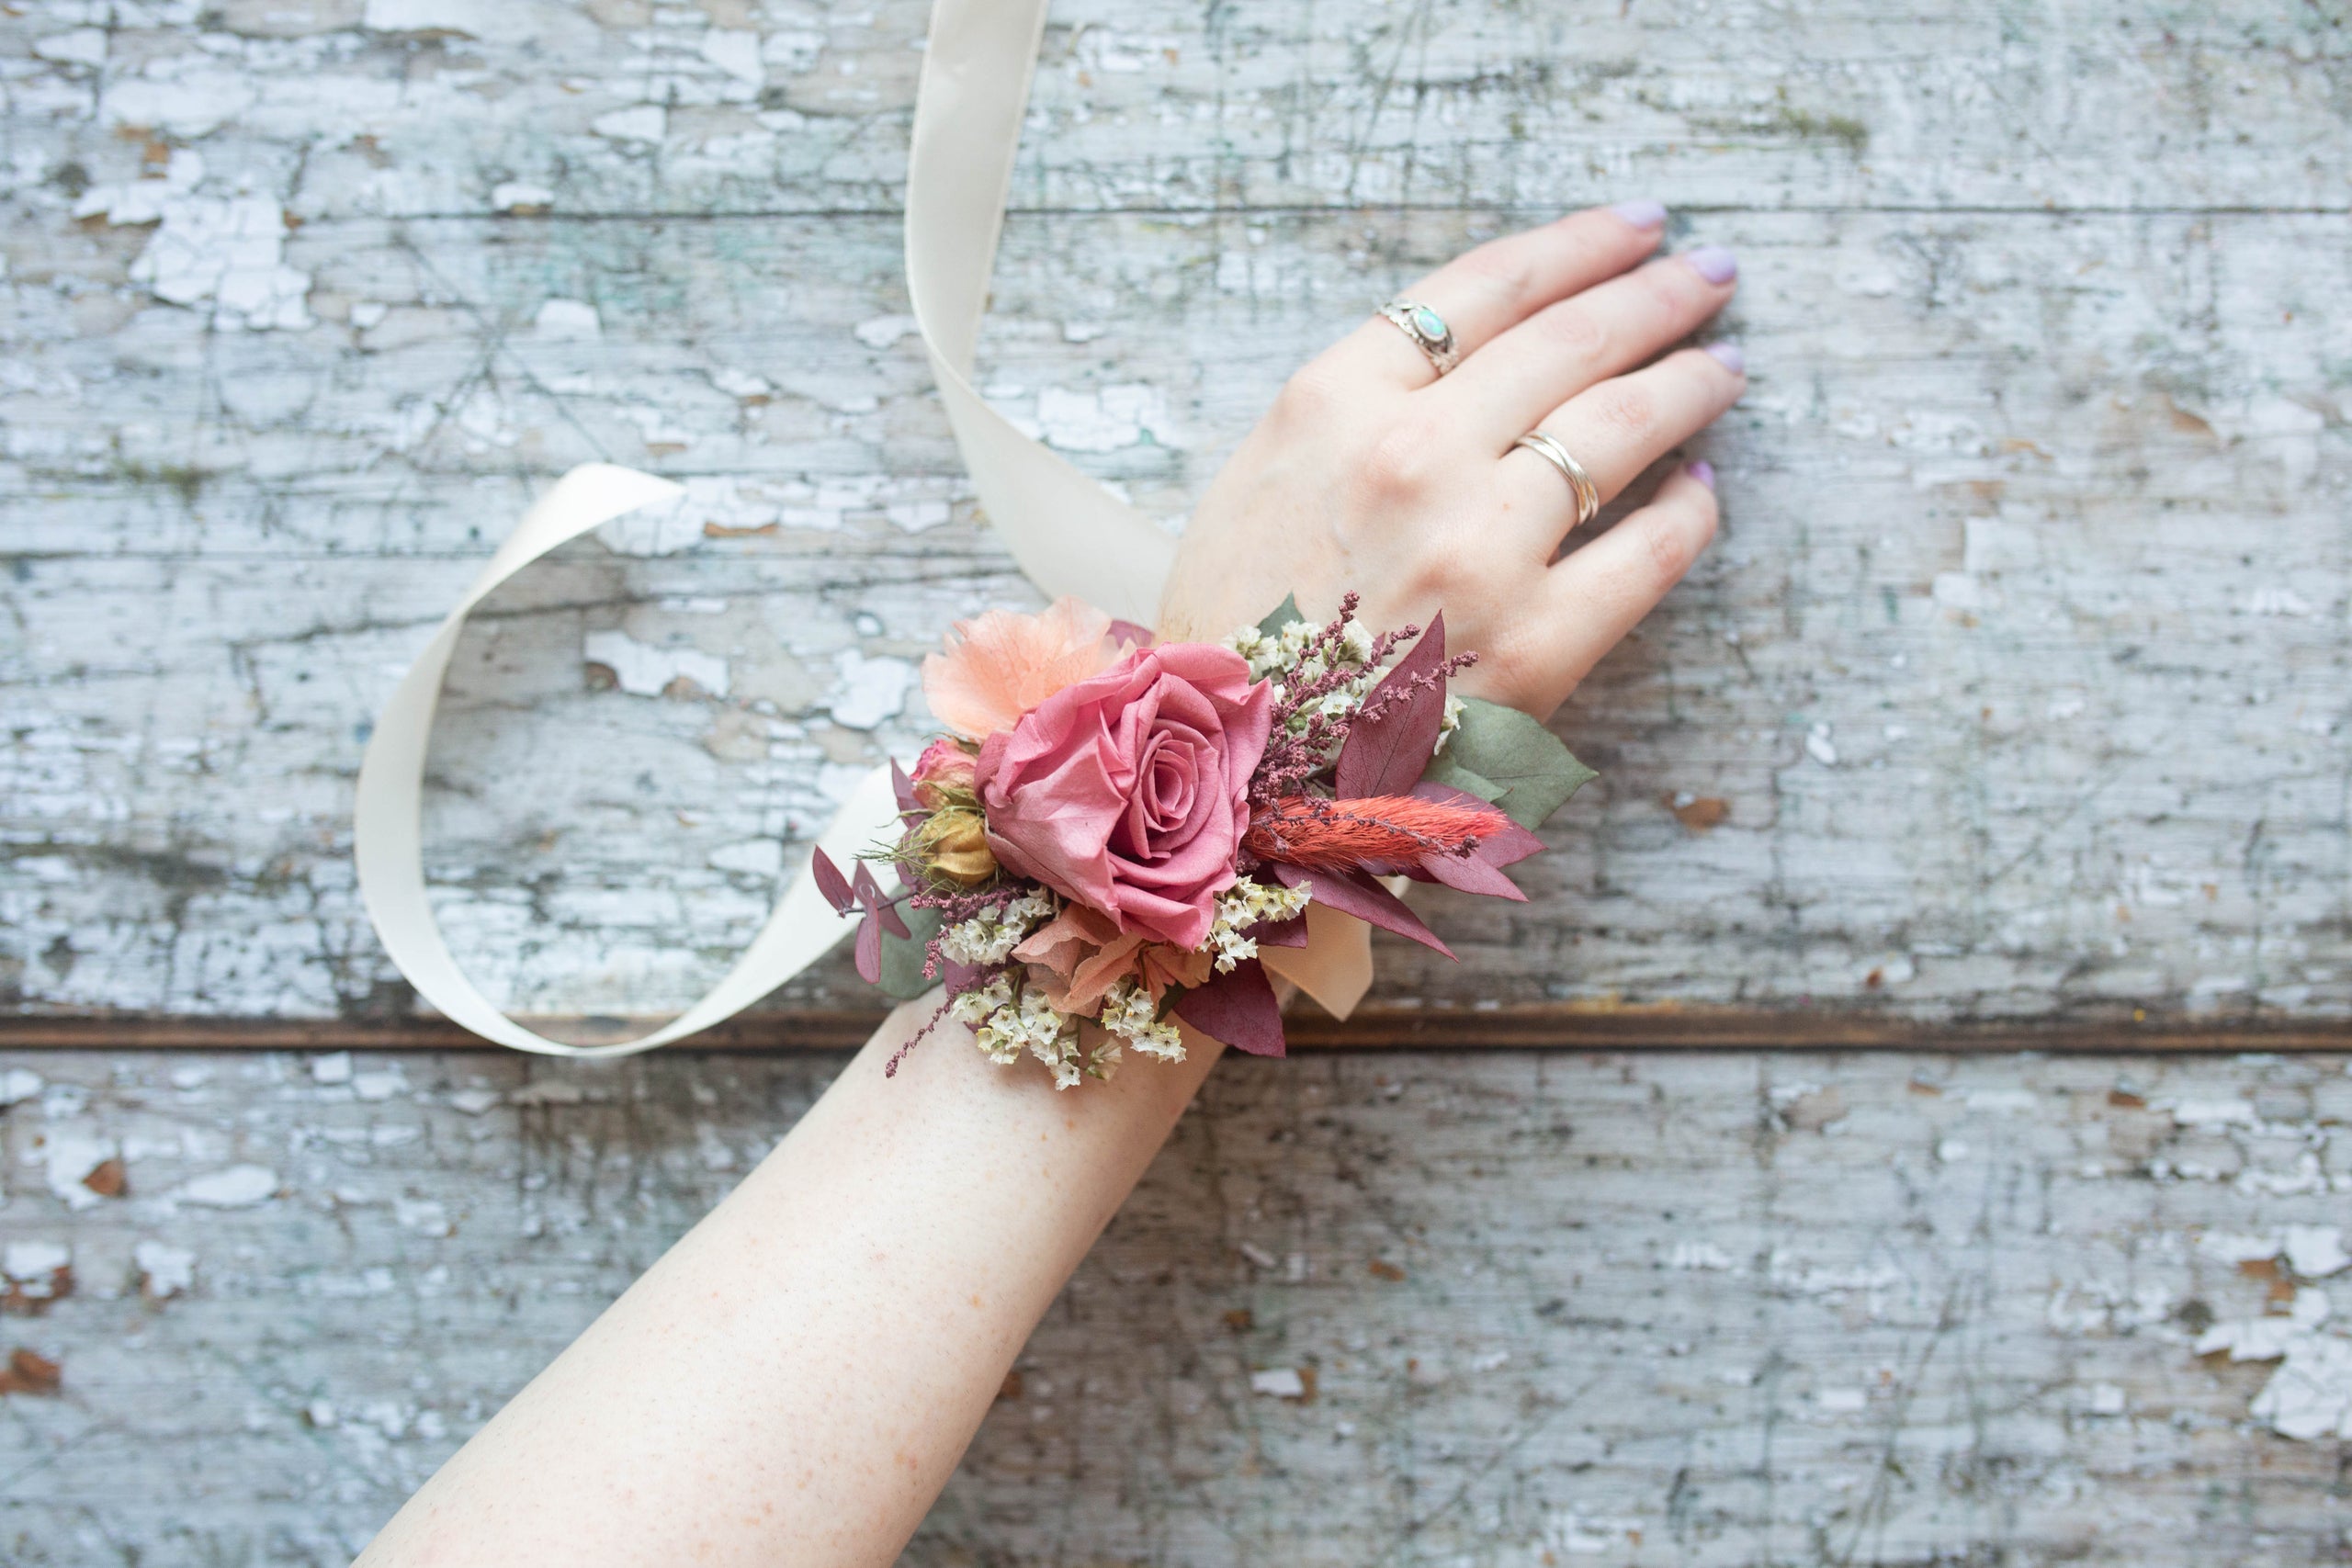 Dried Floral Corsage With Ribbon Overlay, Beautiful Natural Dried